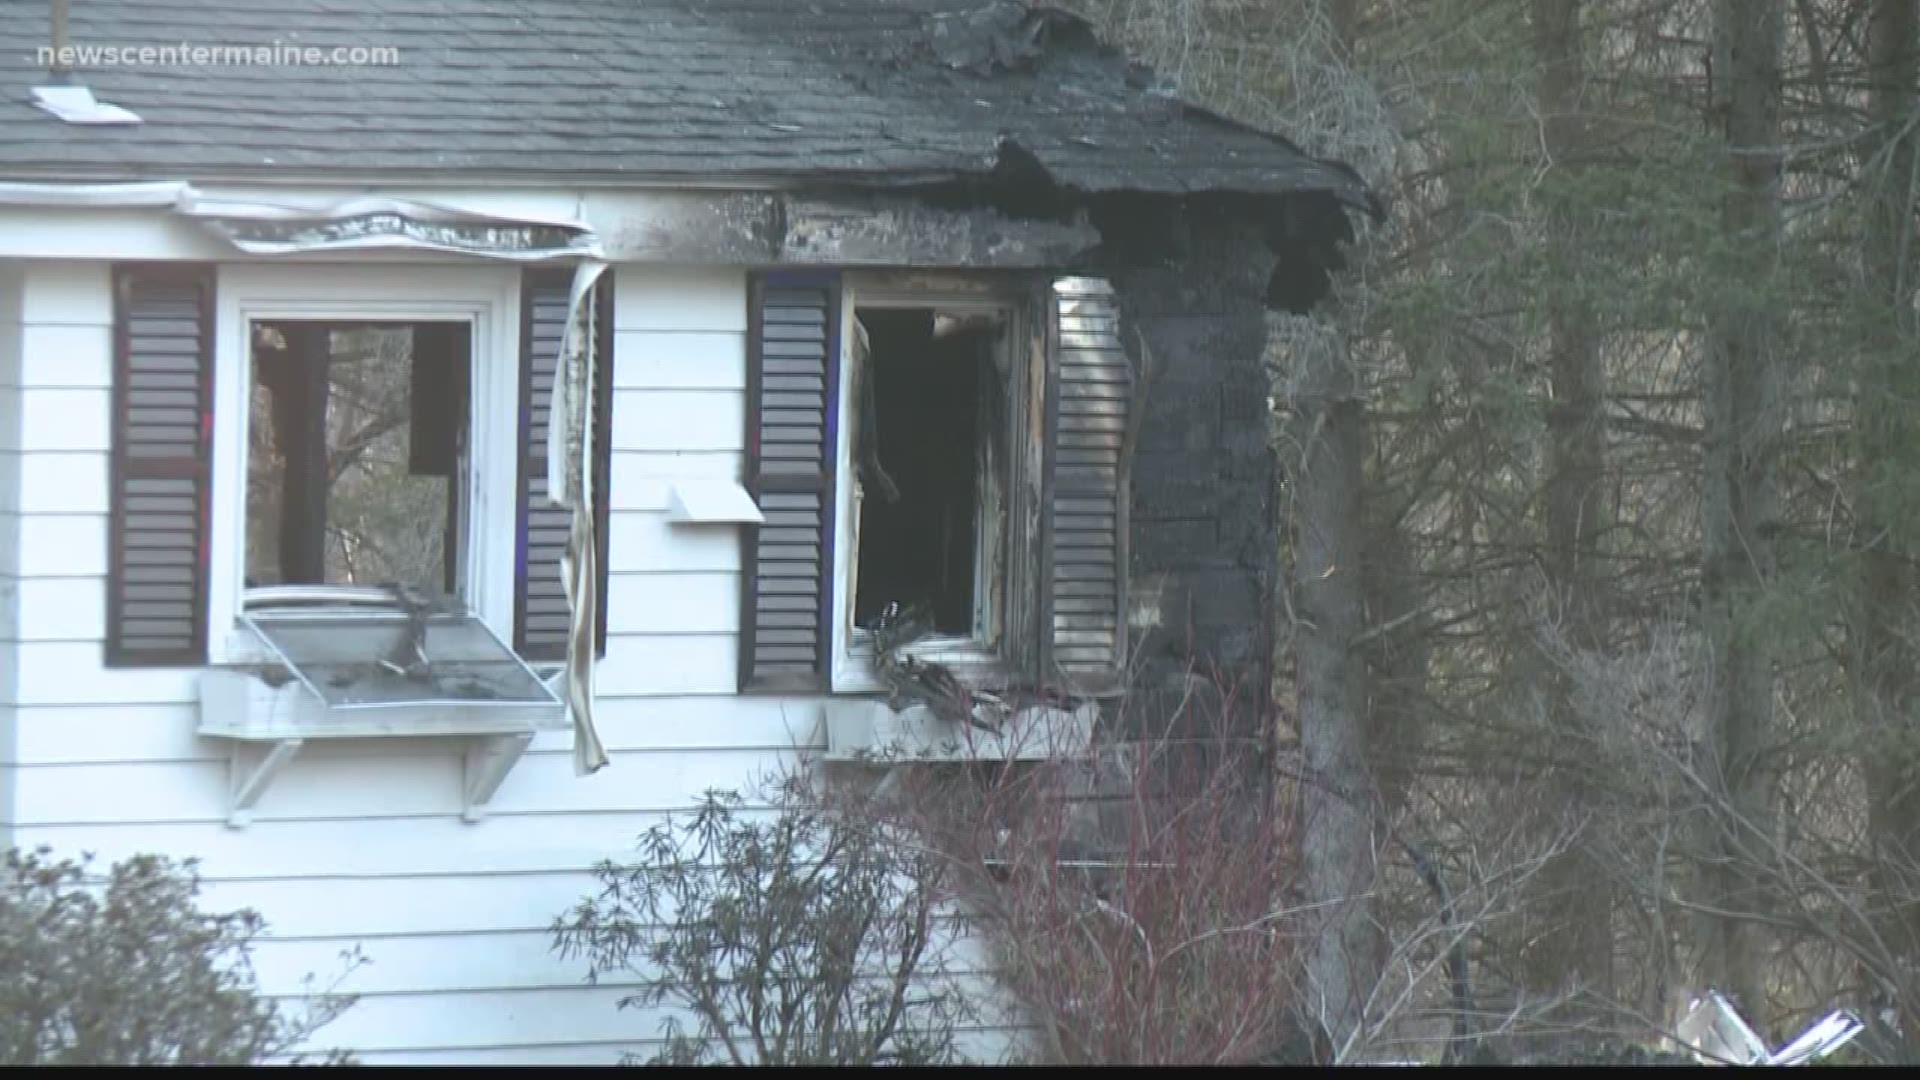 One person dead in house fire in Falmouth